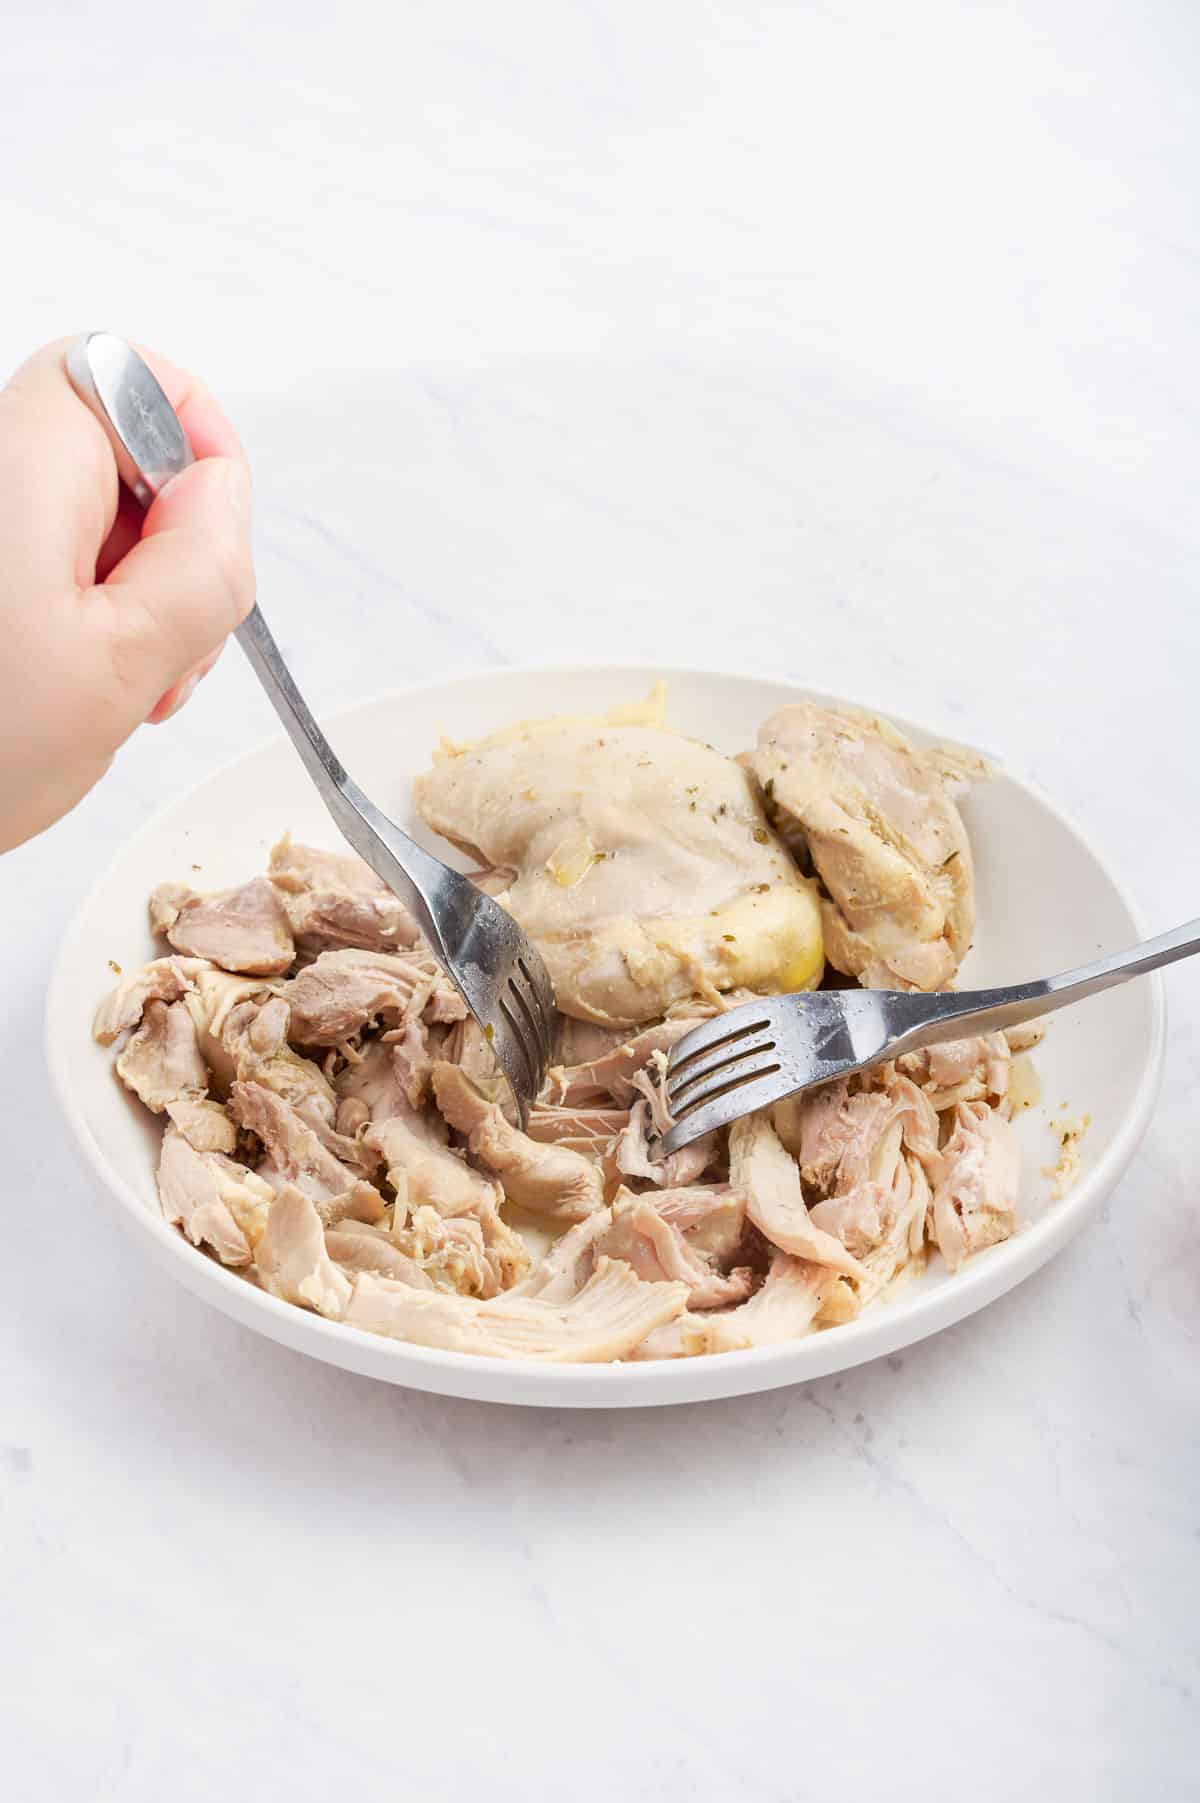 Two forks shredding chicken on a plate.